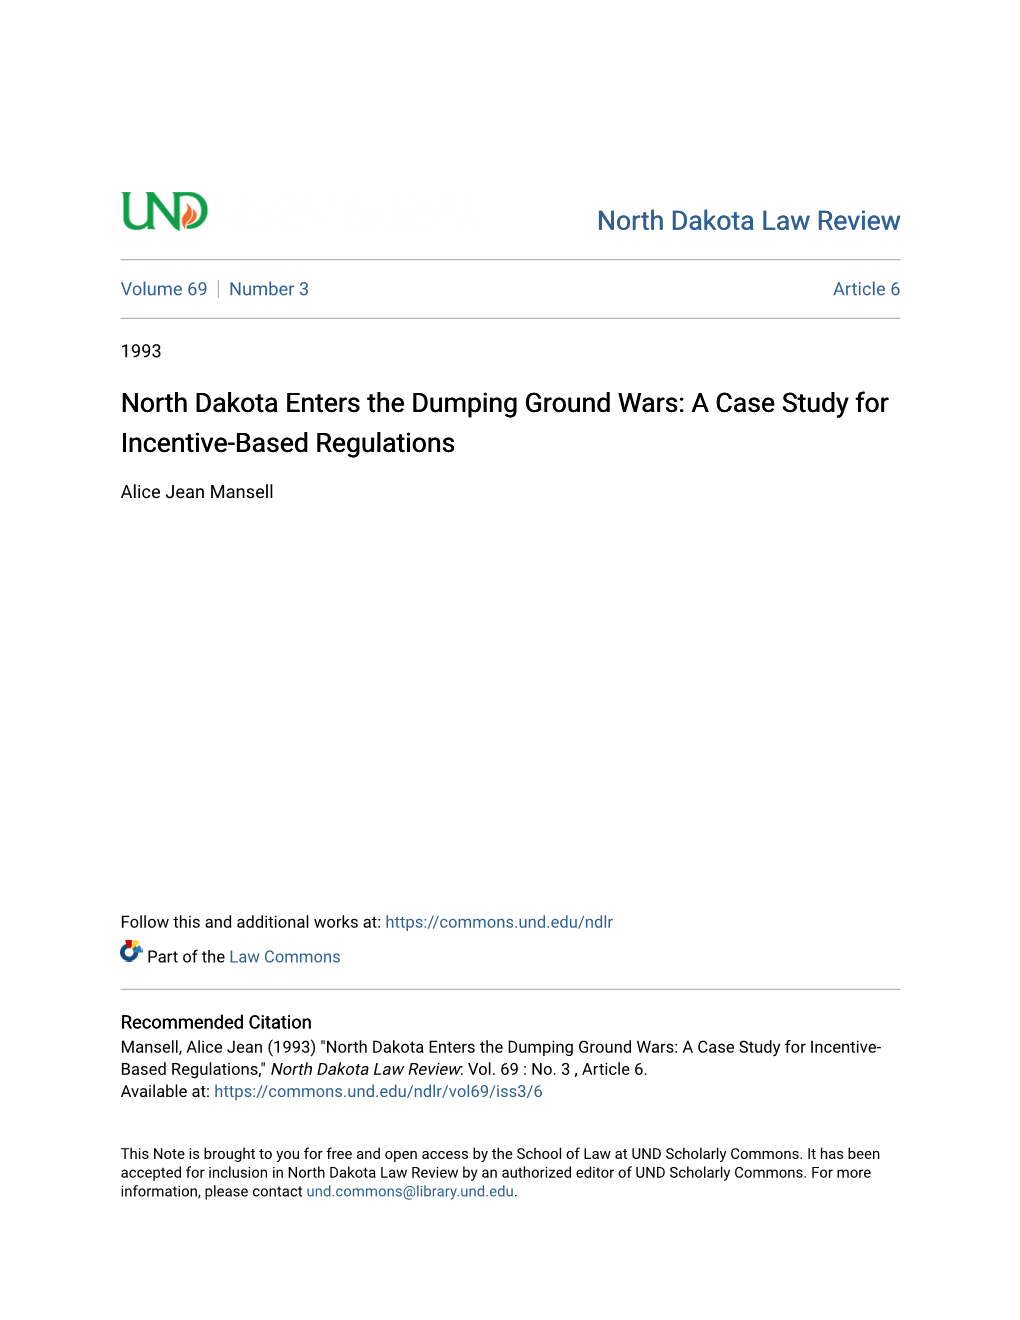 North Dakota Enters the Dumping Ground Wars: a Case Study for Incentive-Based Regulations